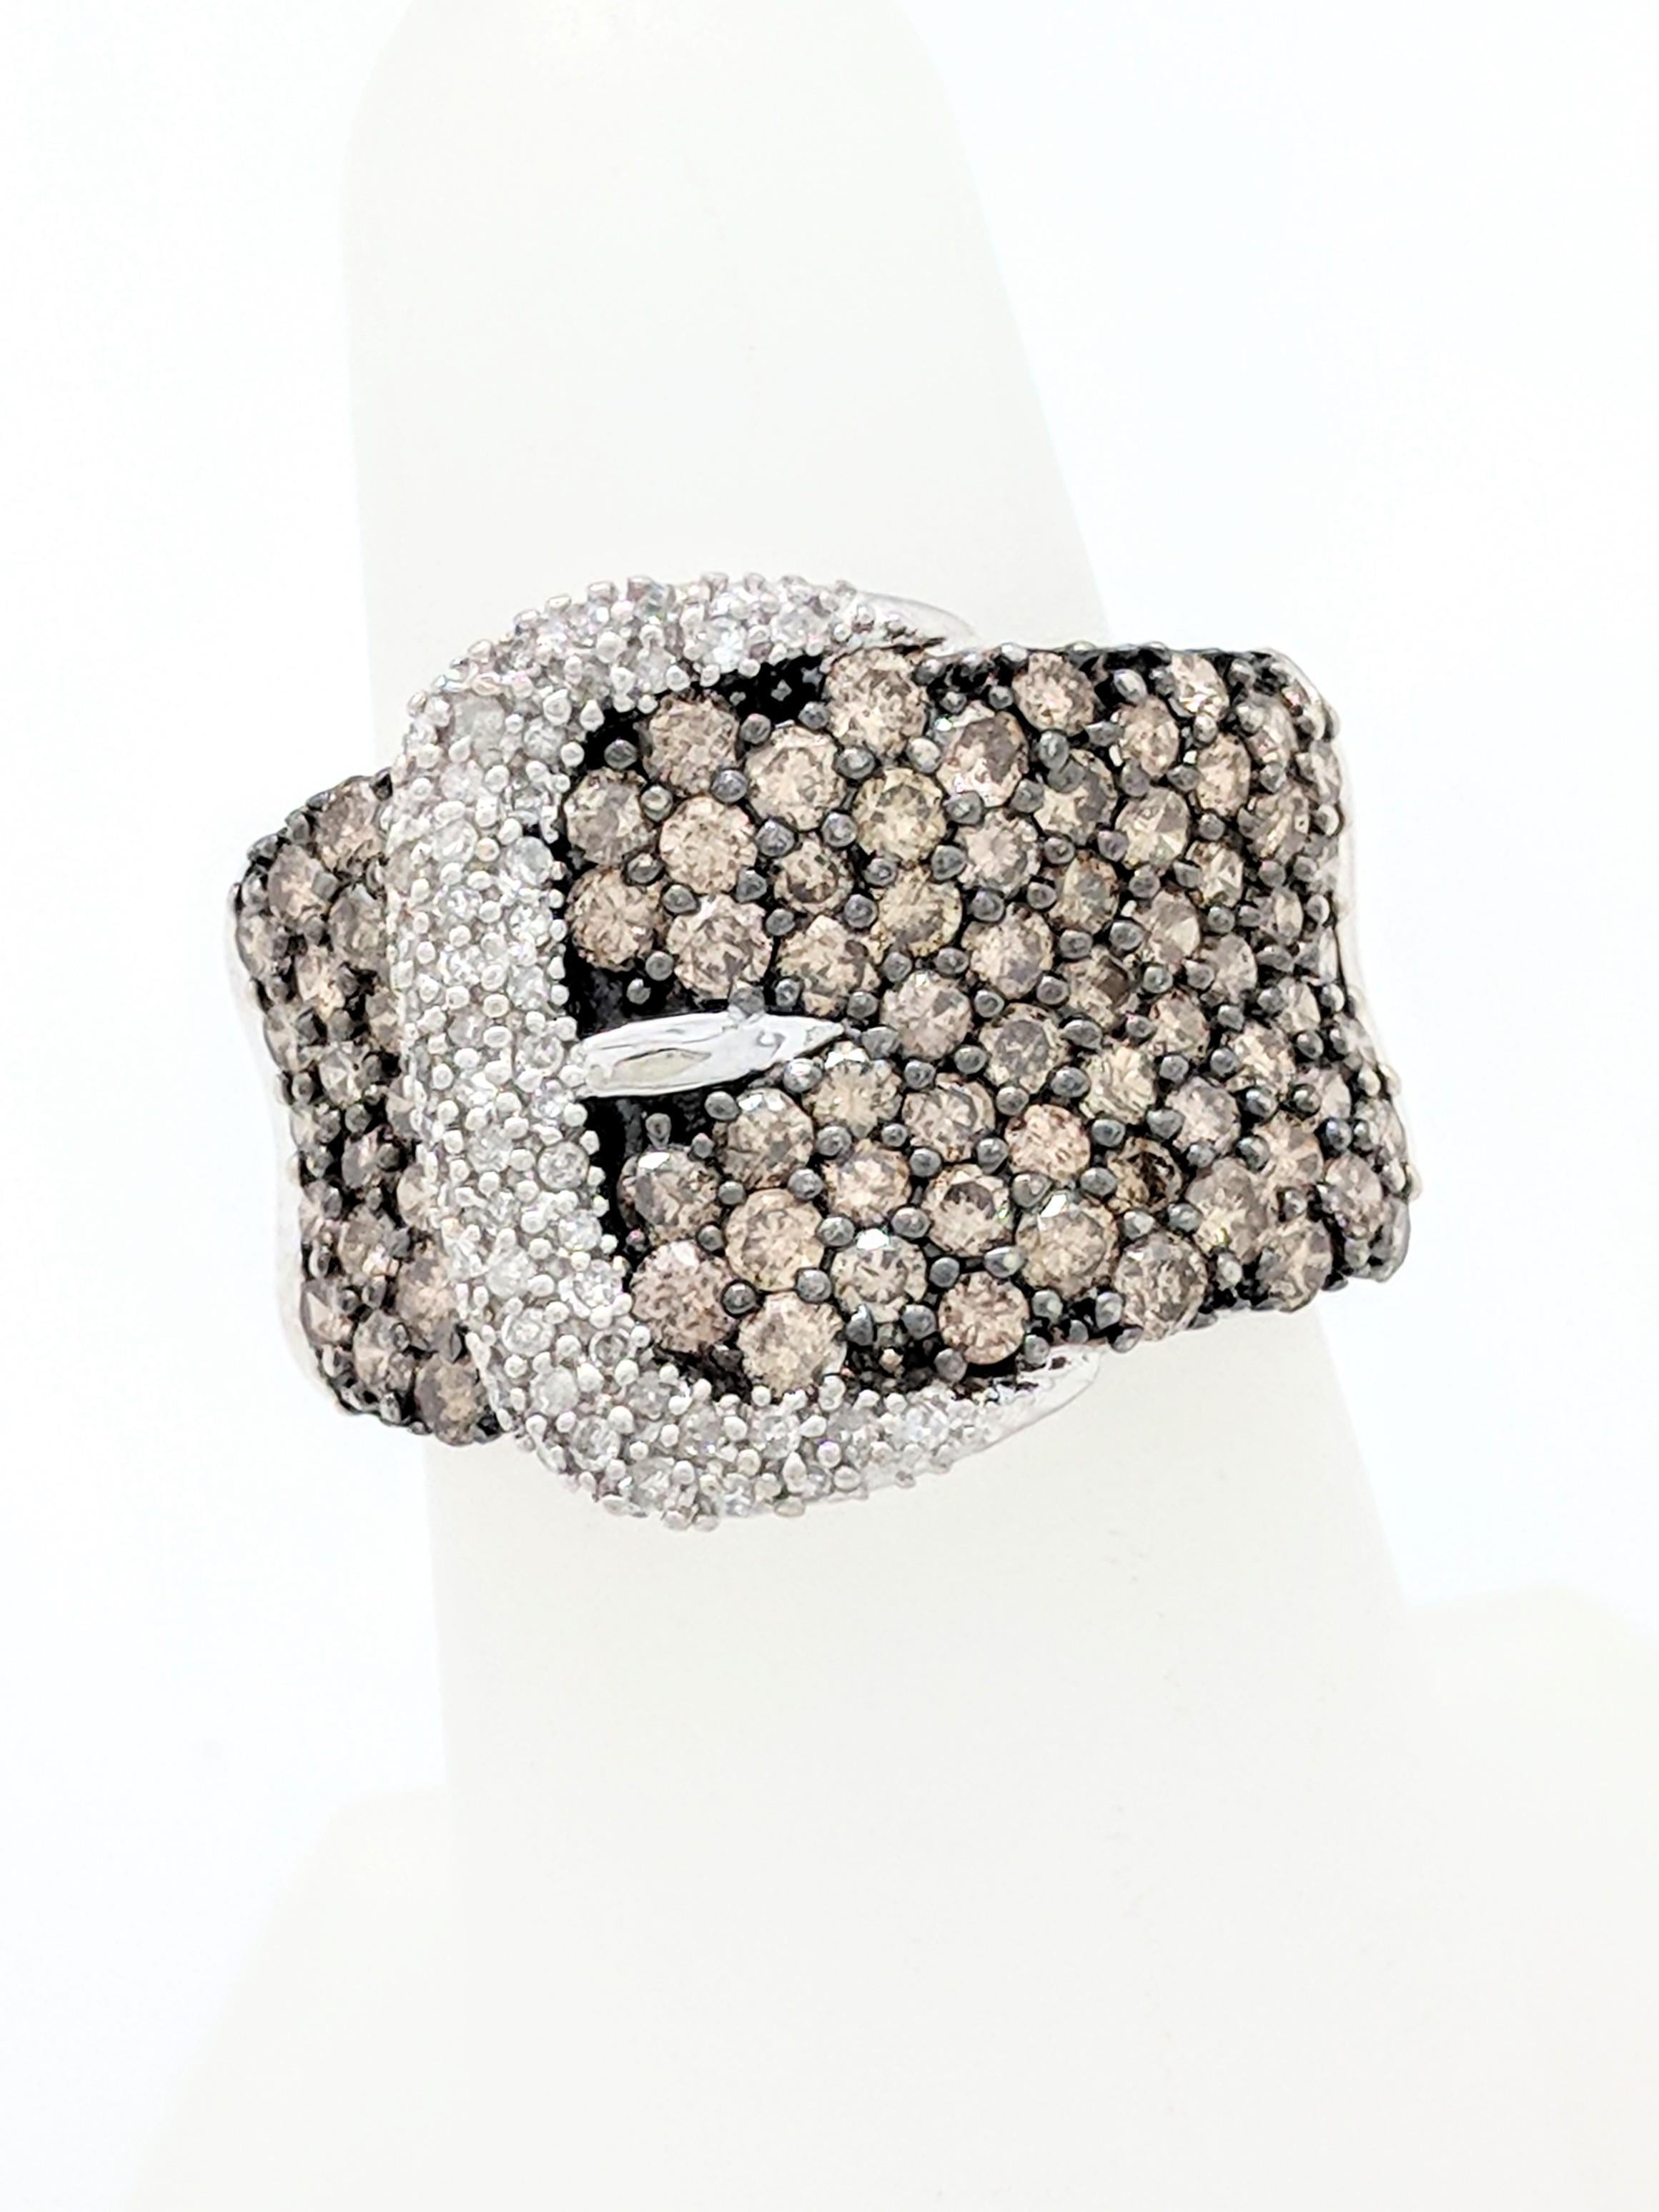 10K White Gold 1.45ctw White & Champagne Pave Diamond Buckle Ring Size 6.5

You are viewing a beautiful pave diamond right hand ring. This ring is crafted from 10k white gold and weighs 6.4 grams. The top of the ring measures 17mm in width and the